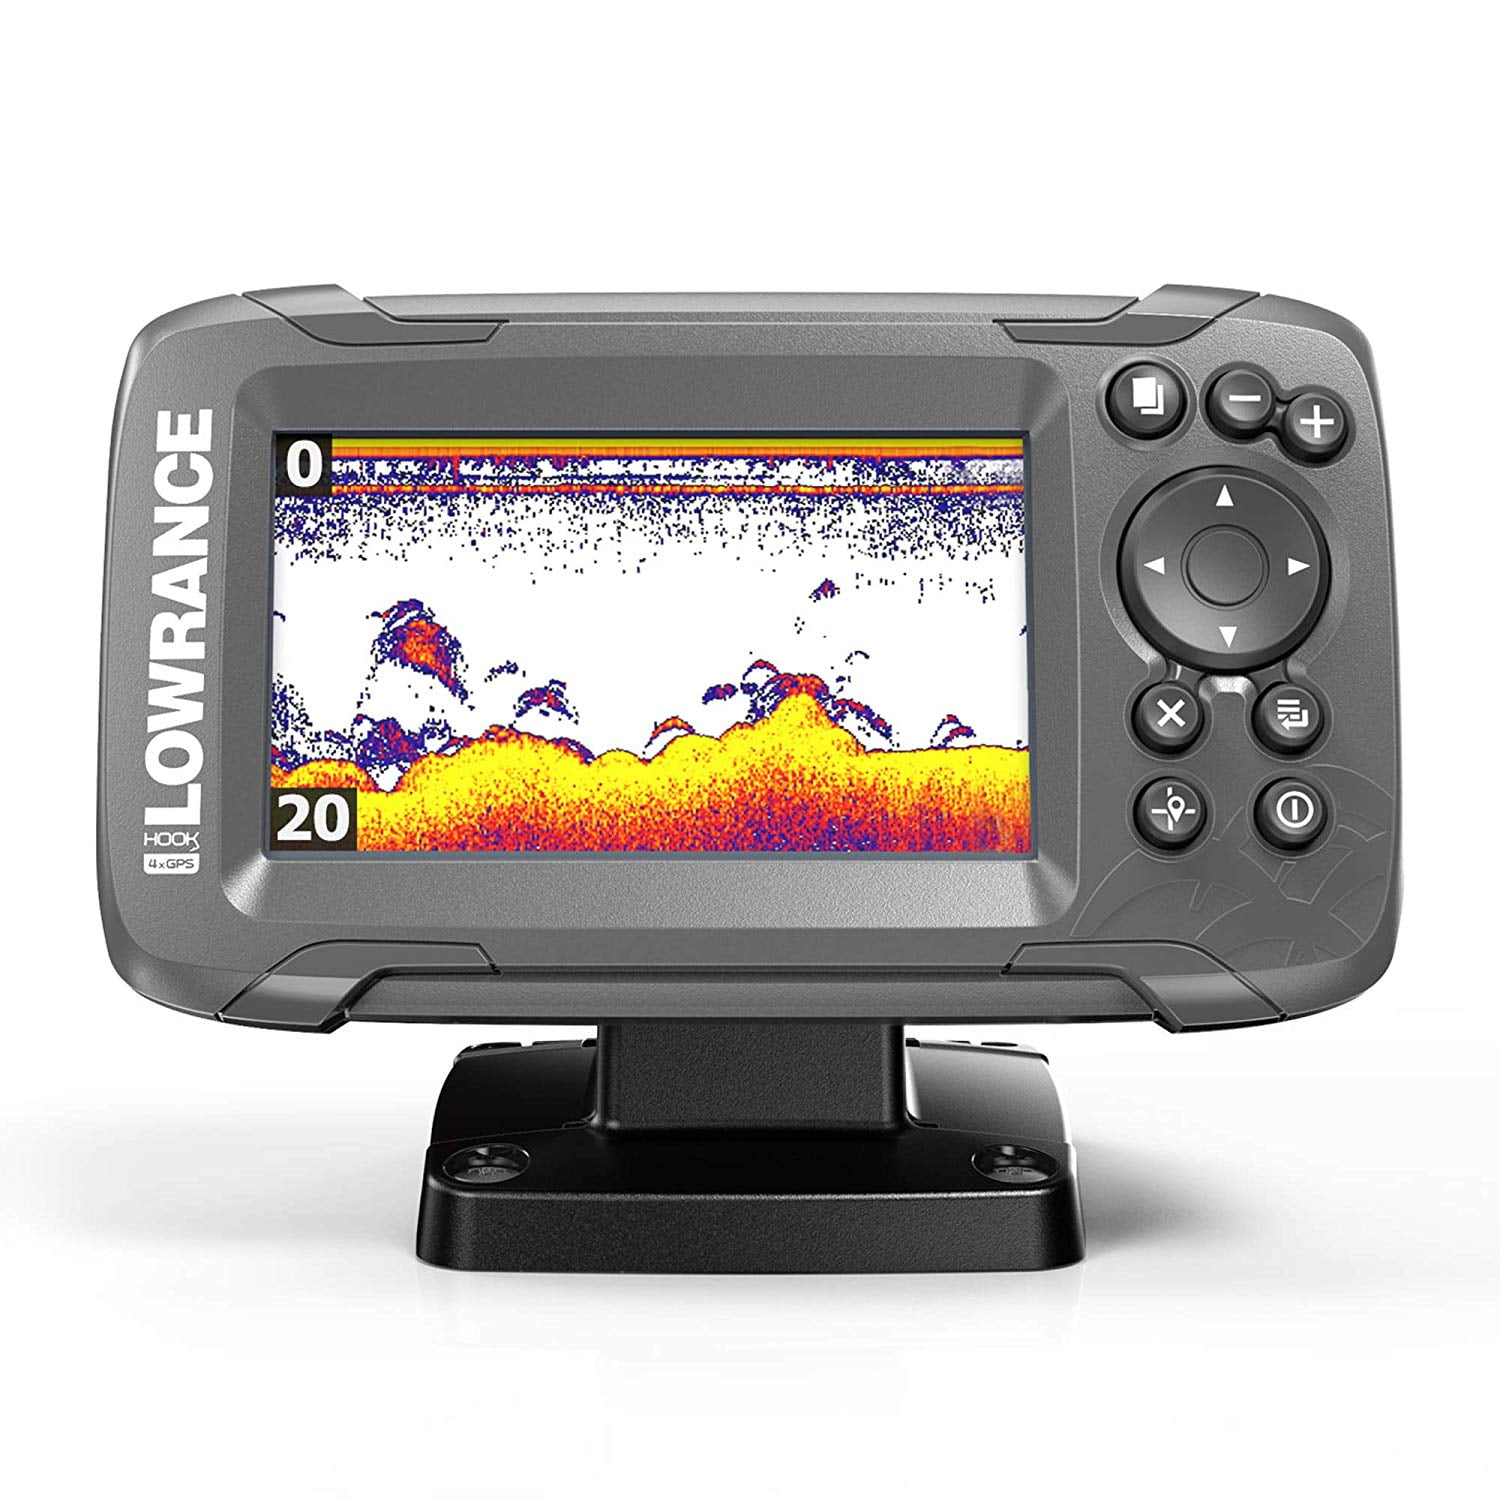 Lowrance Hook Reveal 5 50/200kHz HDI C-MAP Contour+